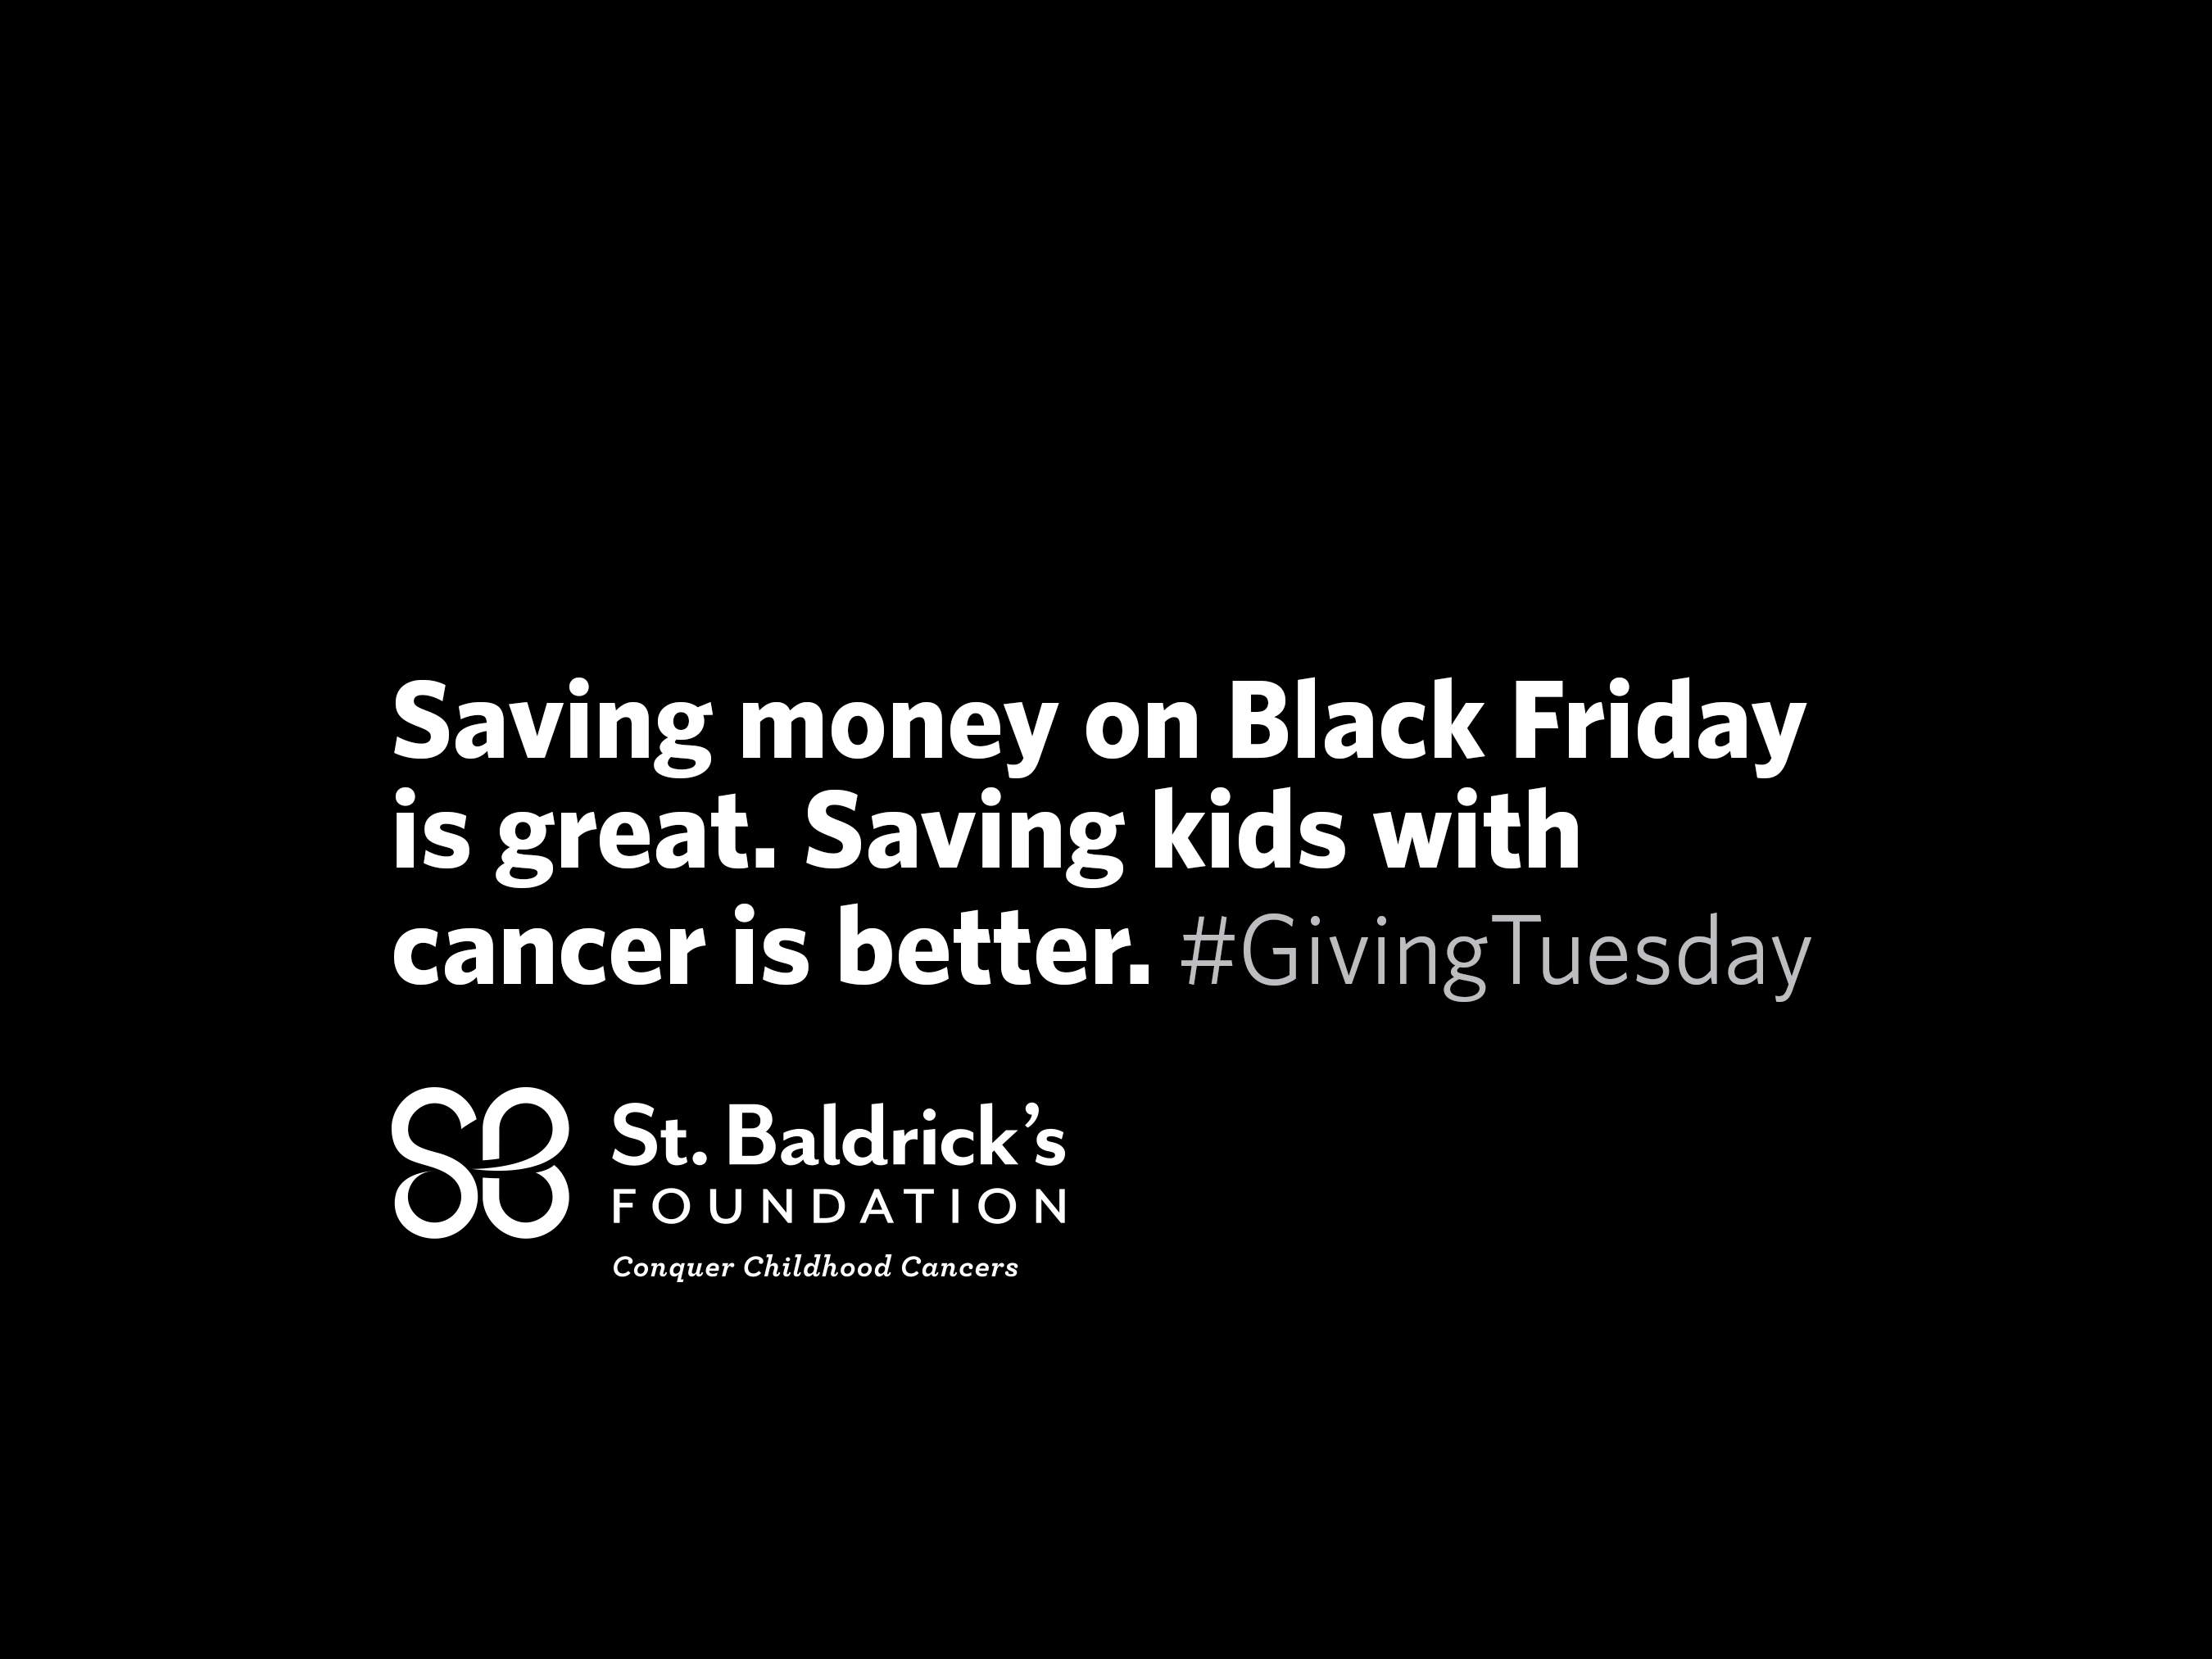 St. Baldrick's Foundation Challenges Holiday Shoppers to Save Kids with Cancer with Giving Tuesday Campaign